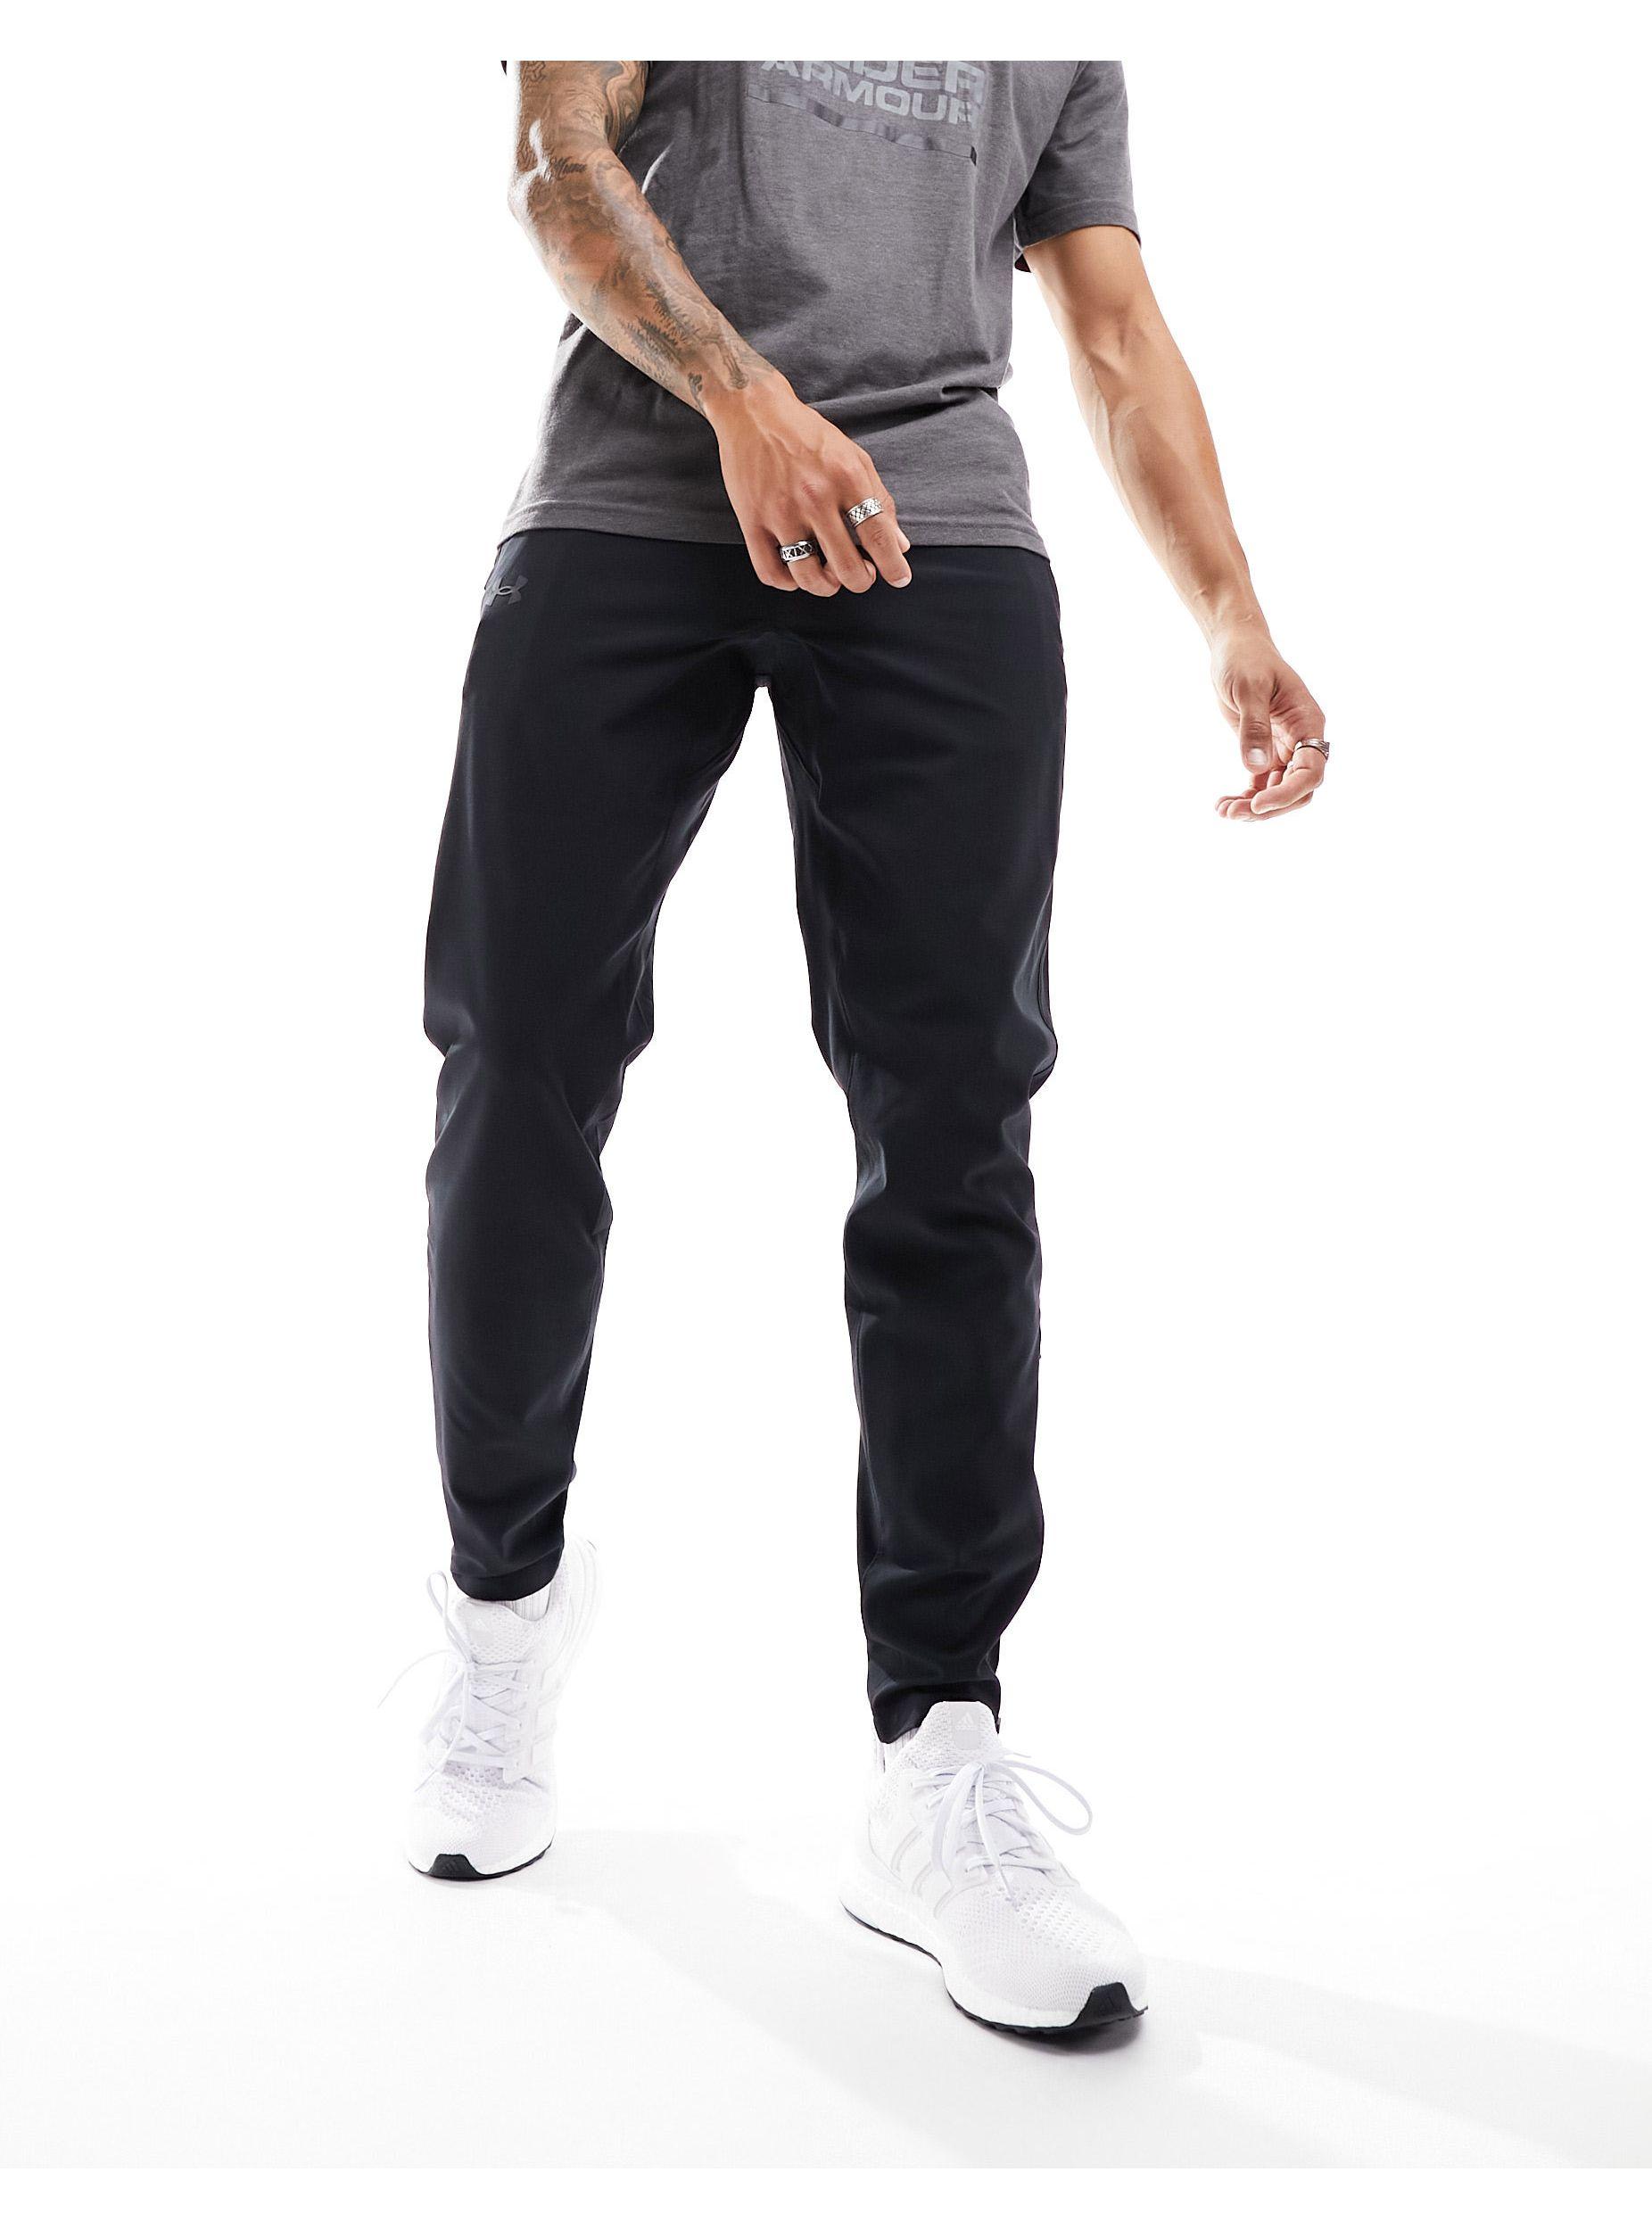 Under Armour Running Storm joggers with side logo in black